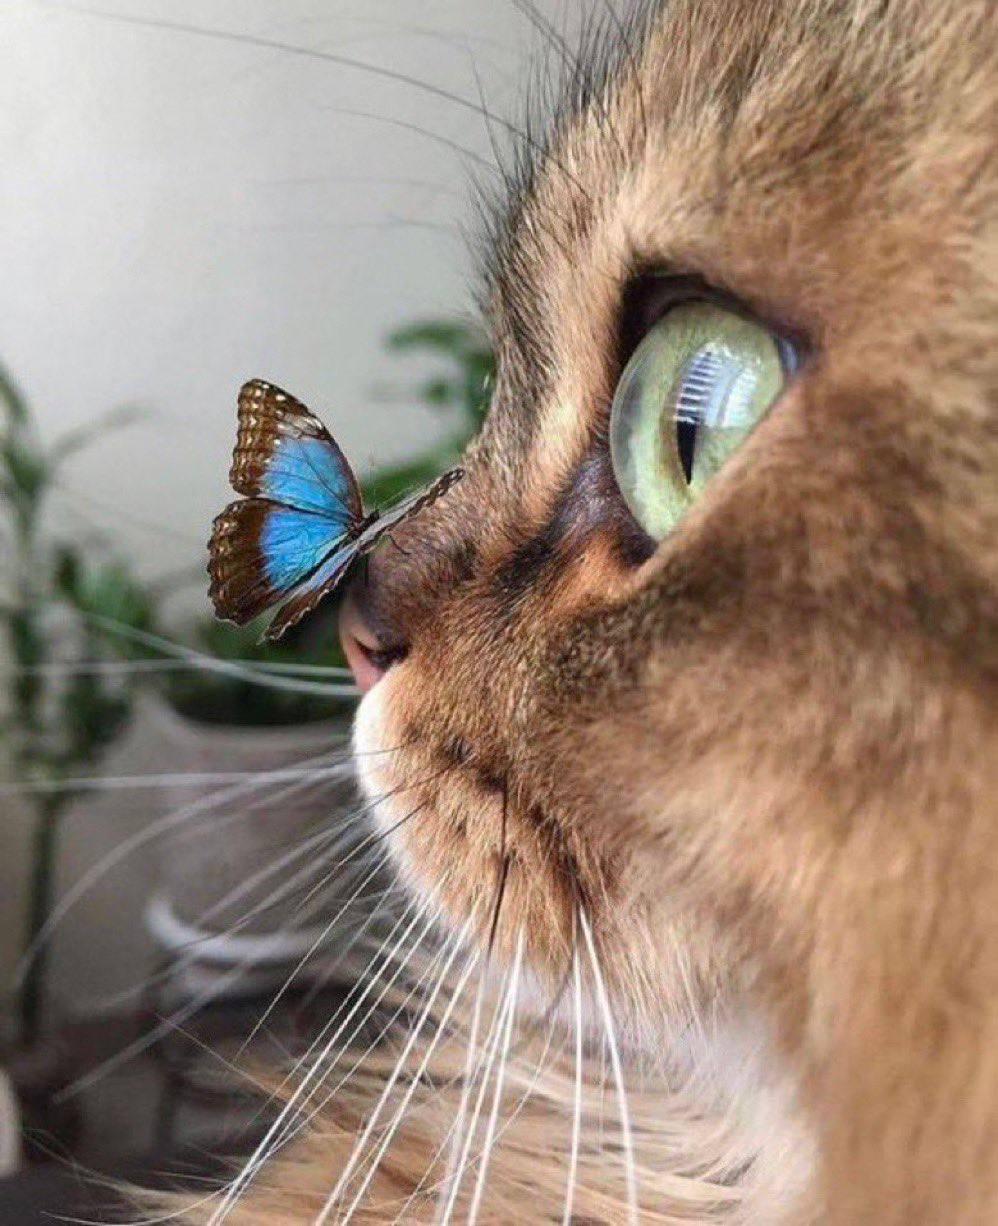 comely cat taken aback by a cute blueish butterfly